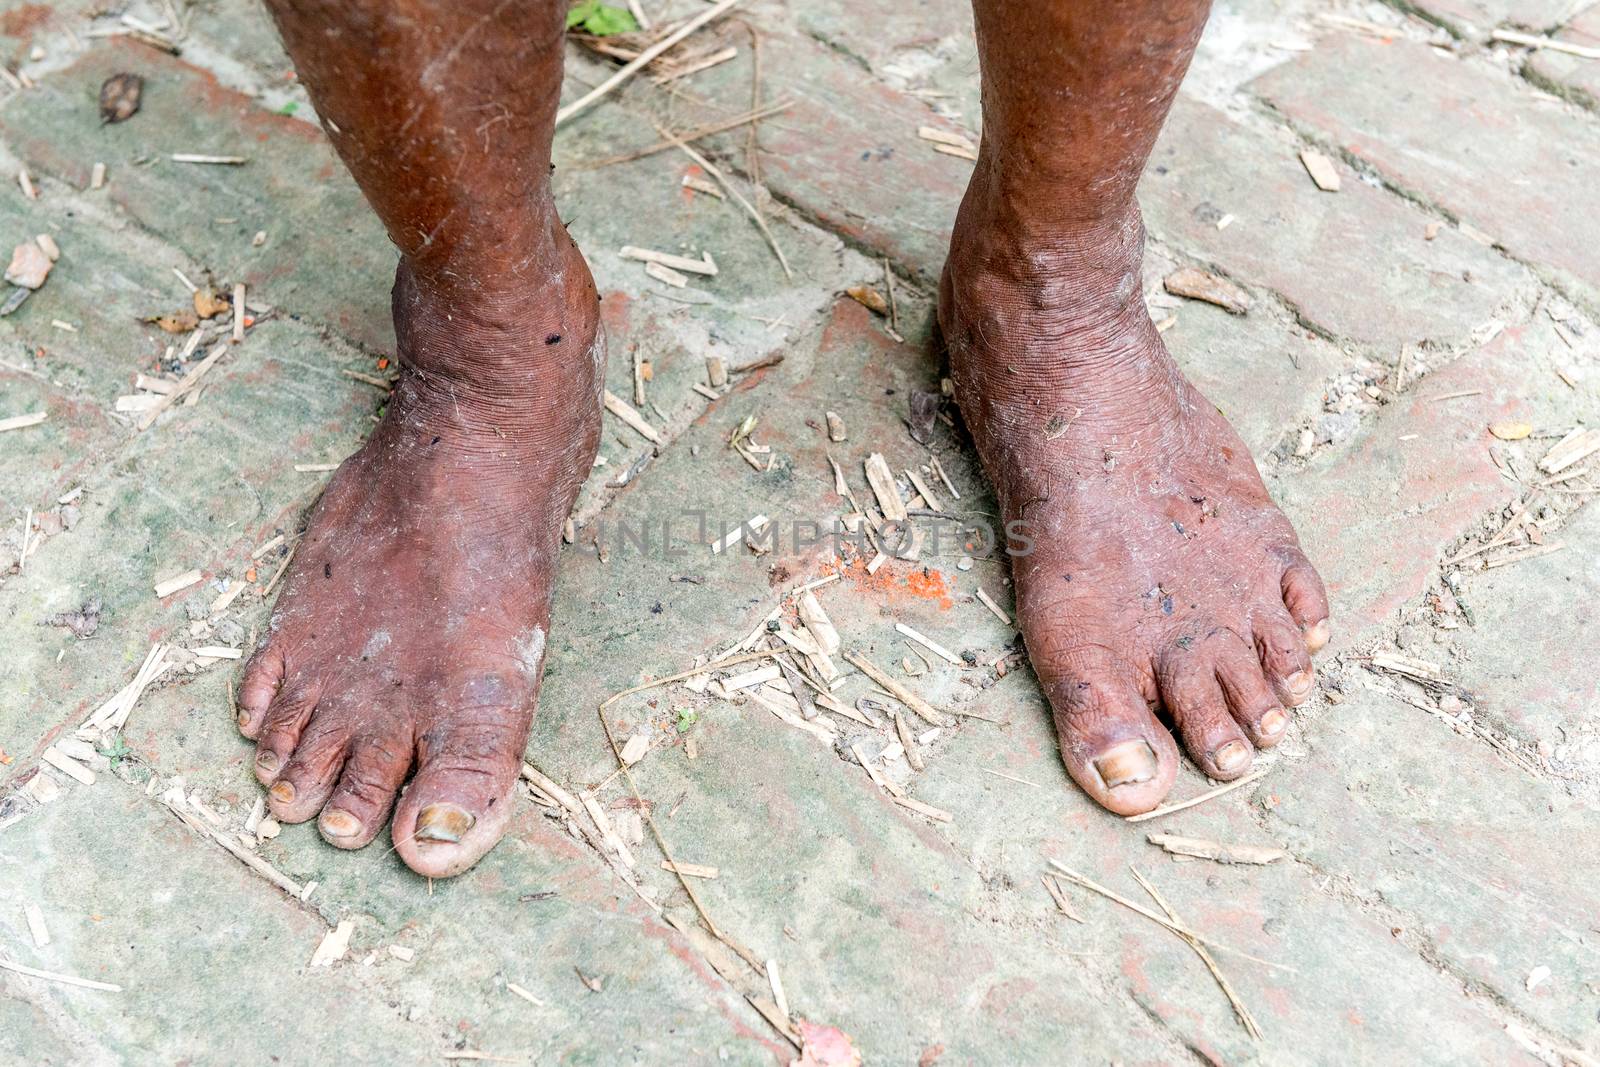 Legs of a labor with muddy by sohel.parvez@hotmail.com